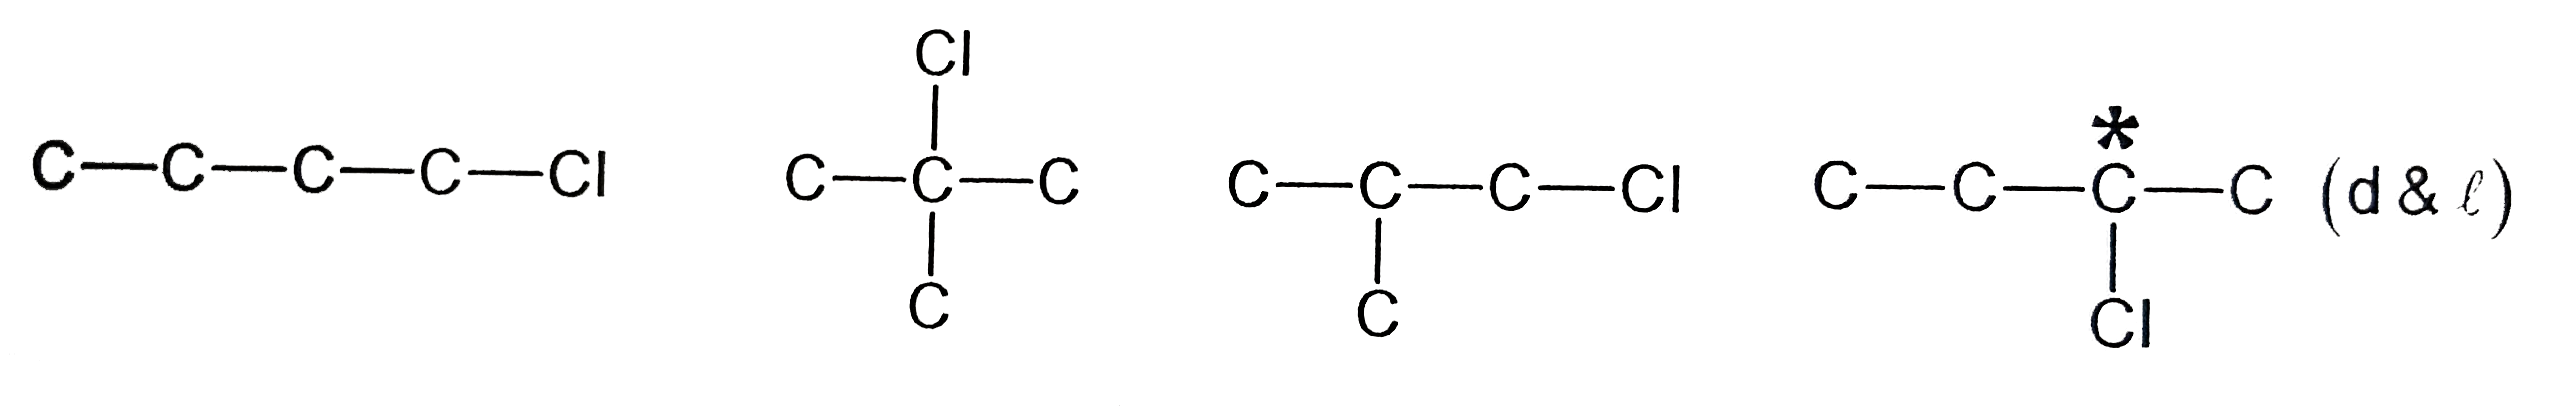 c4h9cl isomers structure